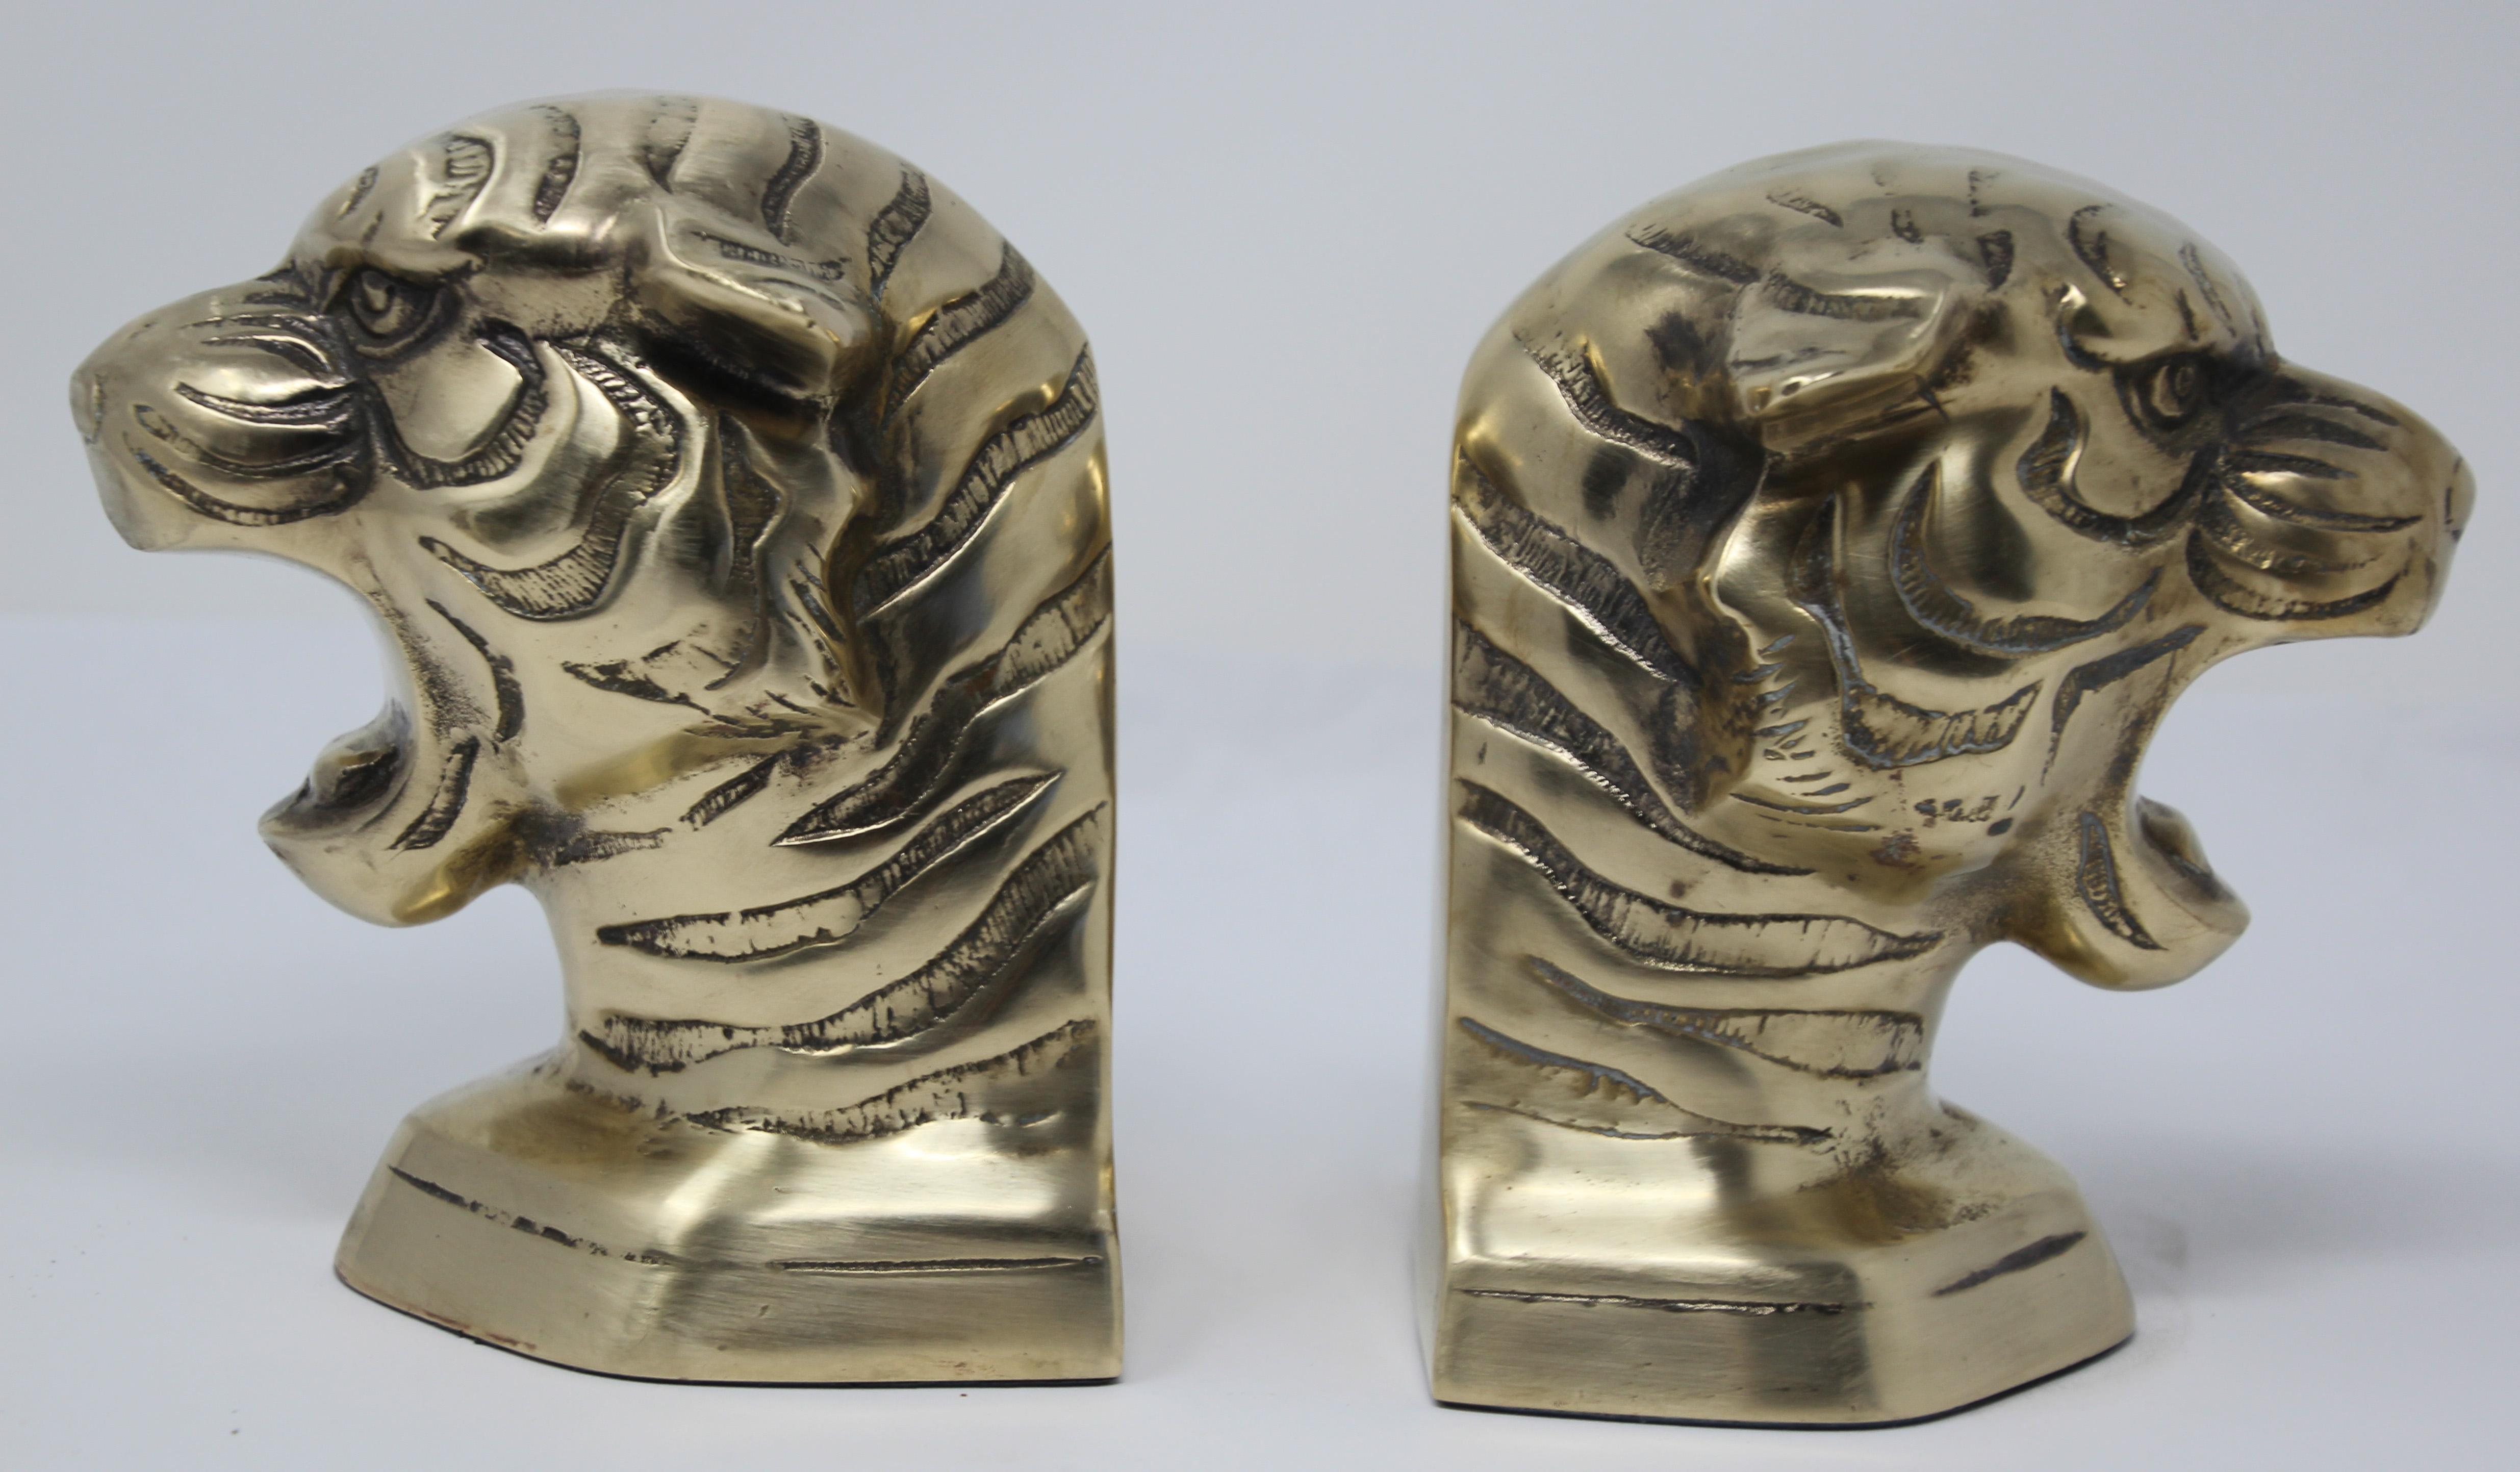 Pair of polished decorative cast polished brass tiger’s bookends, circa 1950.
Midcentury vintage cast heavy metal brass tiger’s heads sculpture bust bookends.
Size for each is 5.5